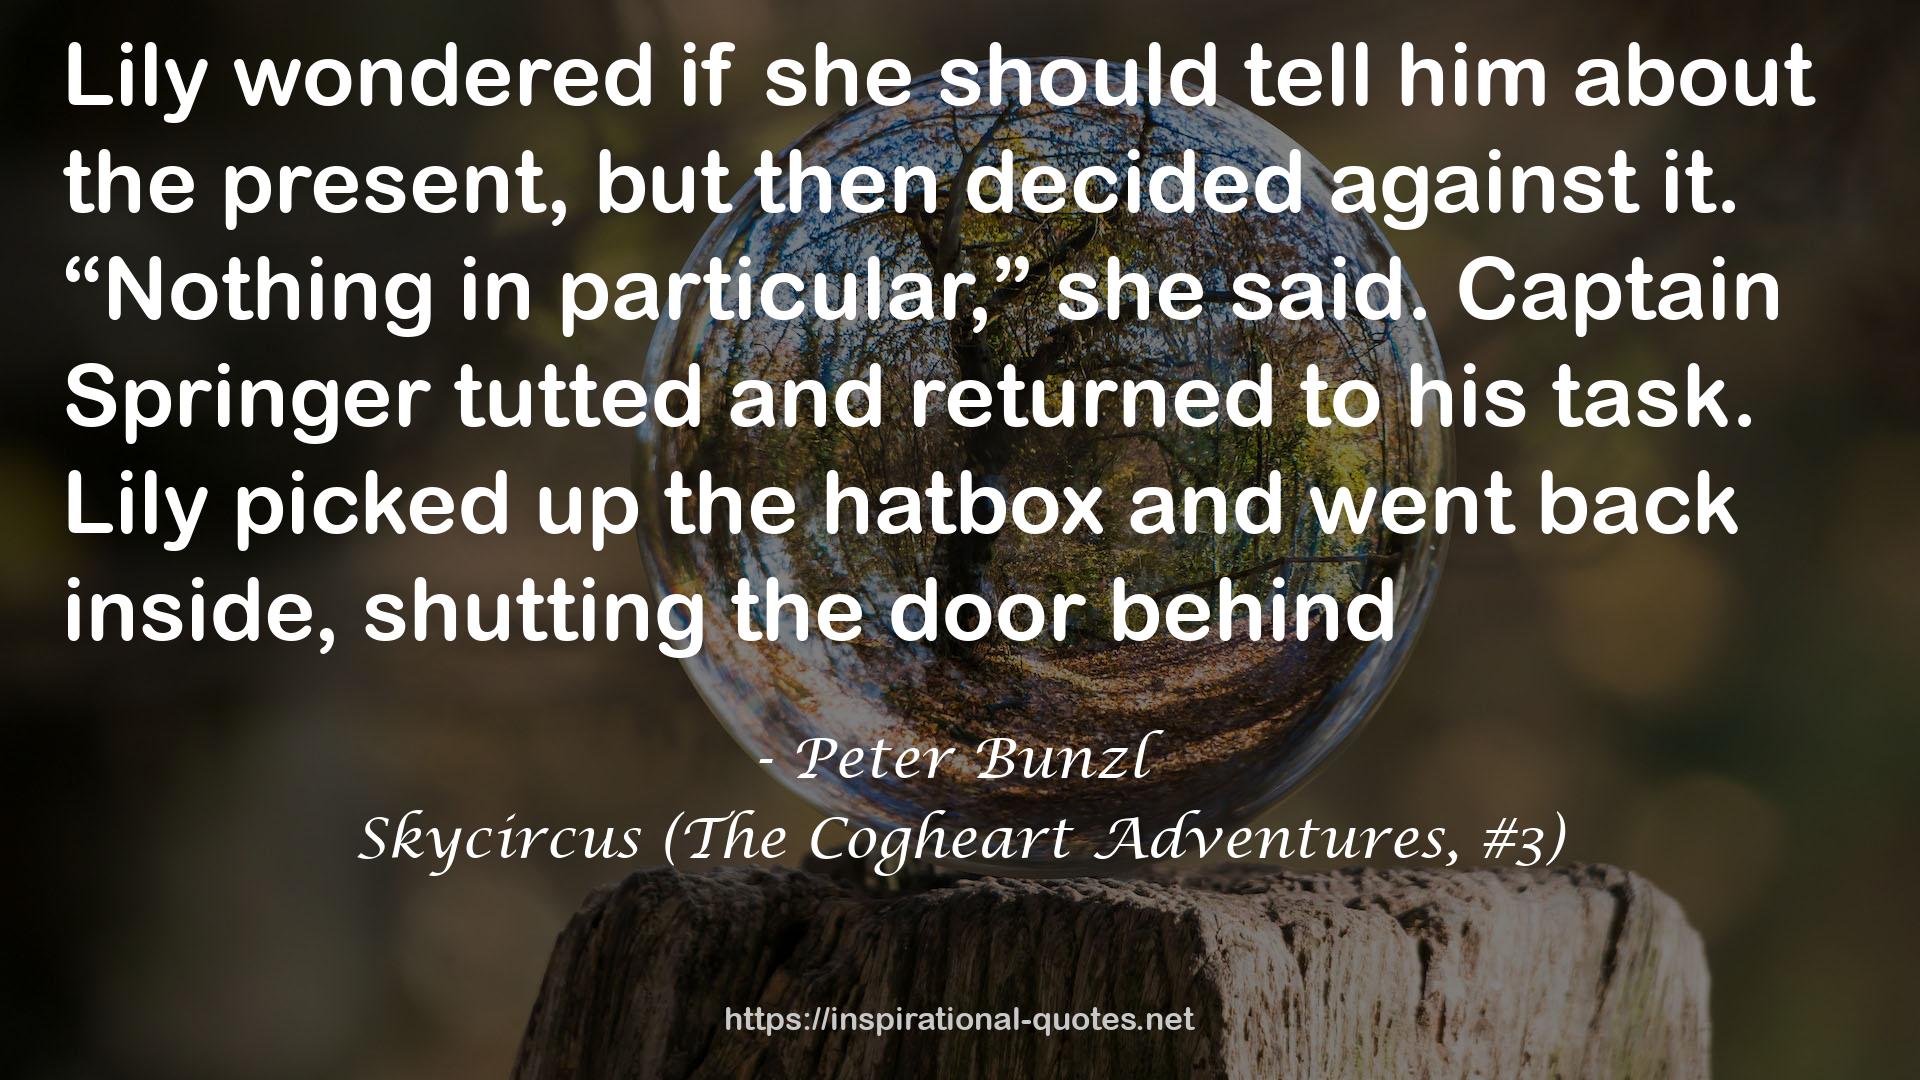 Skycircus (The Cogheart Adventures, #3) QUOTES